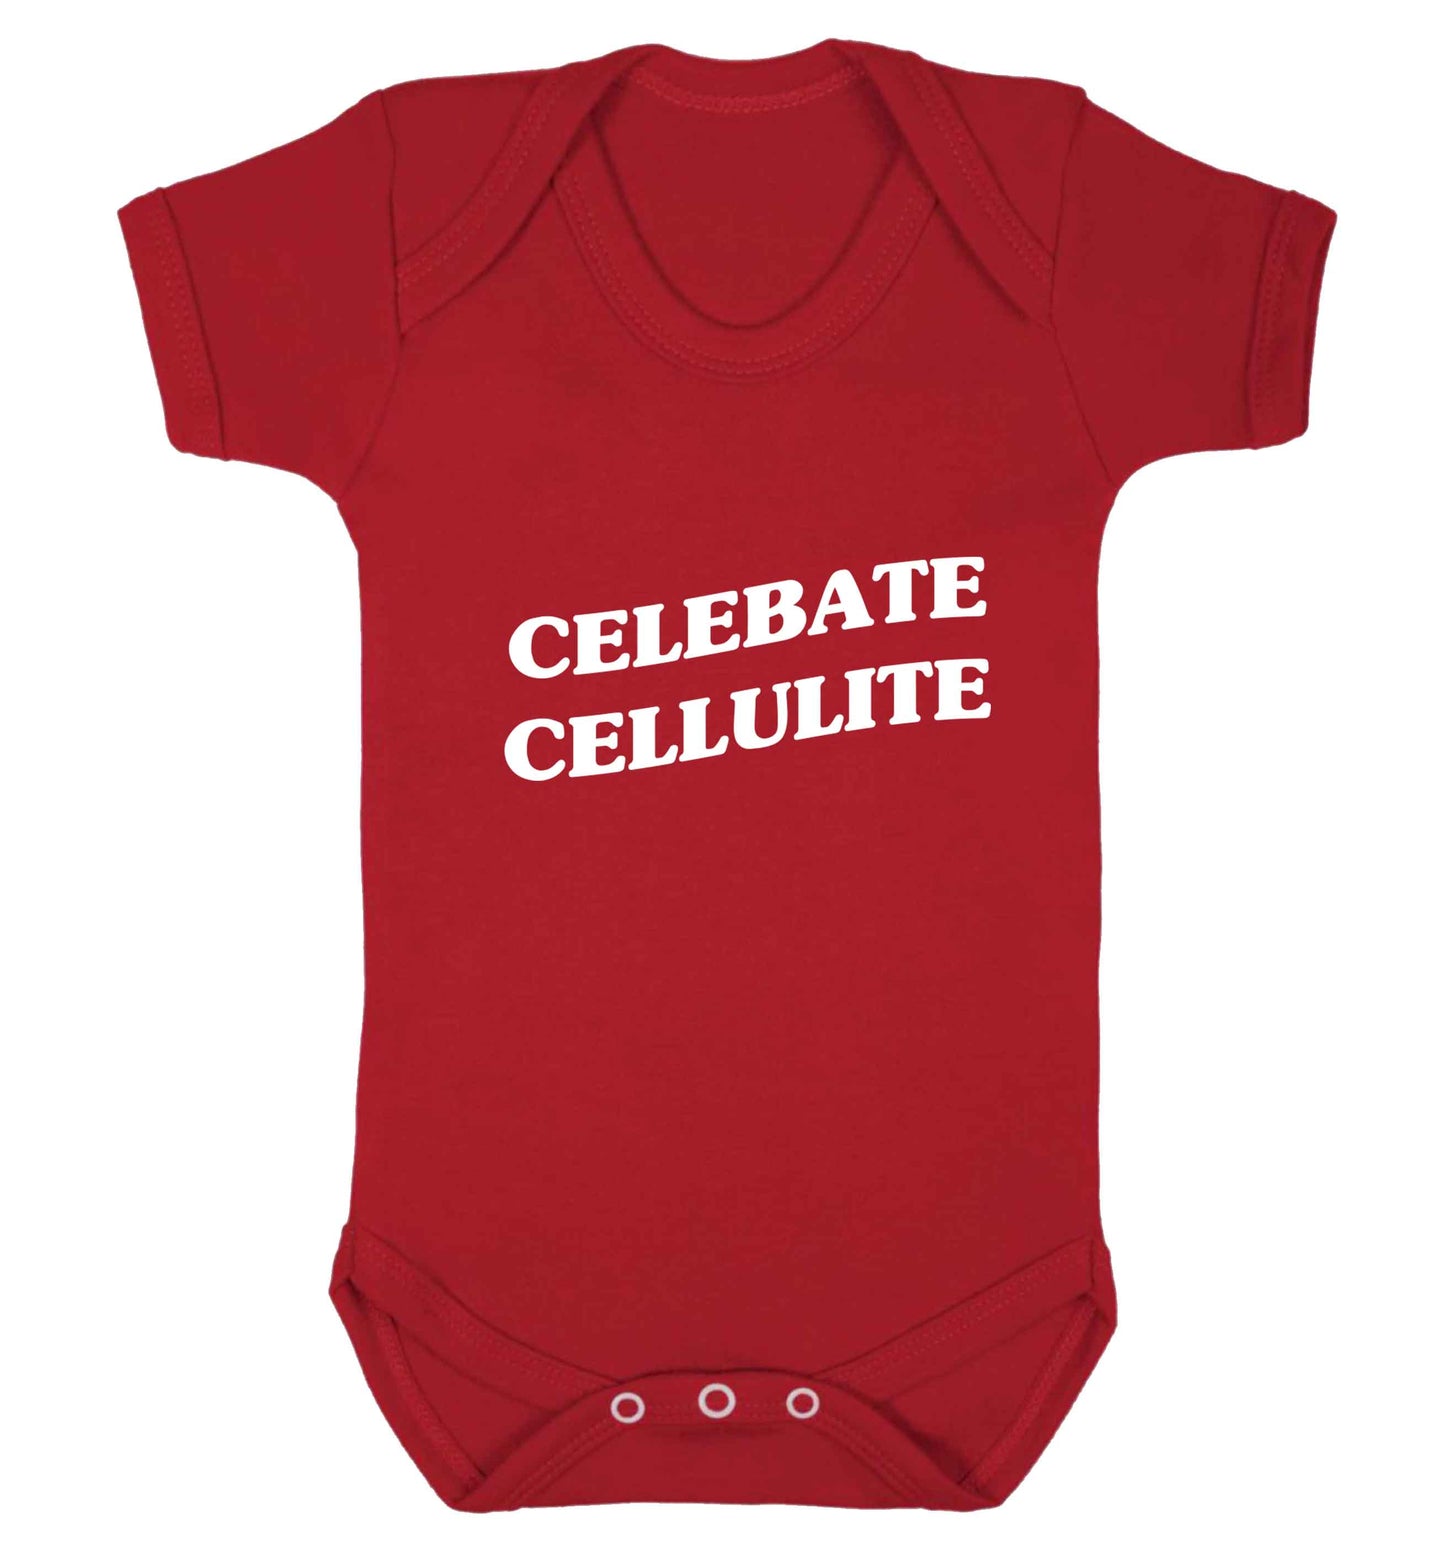 Celebrate cellulite baby vest red 18-24 months